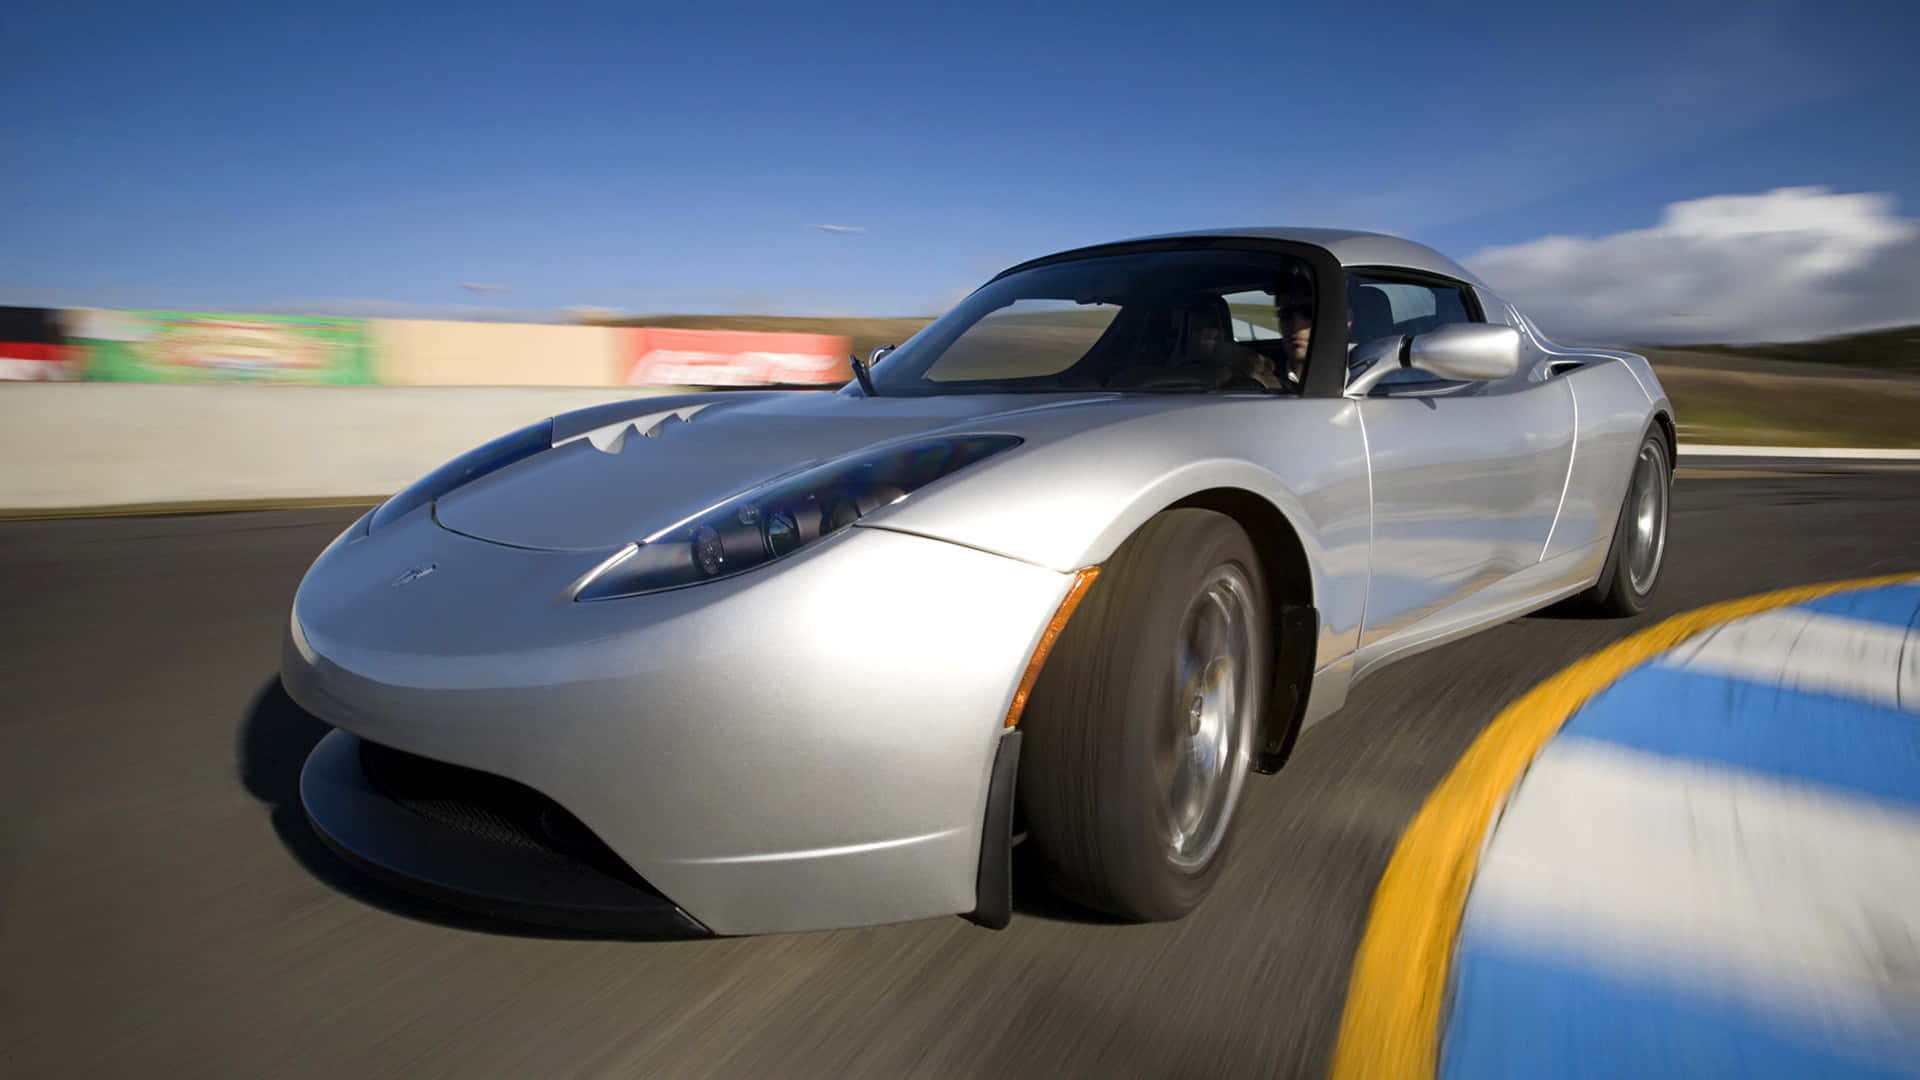 The Futuristic Tesla Roadster On A Riding Spree Background